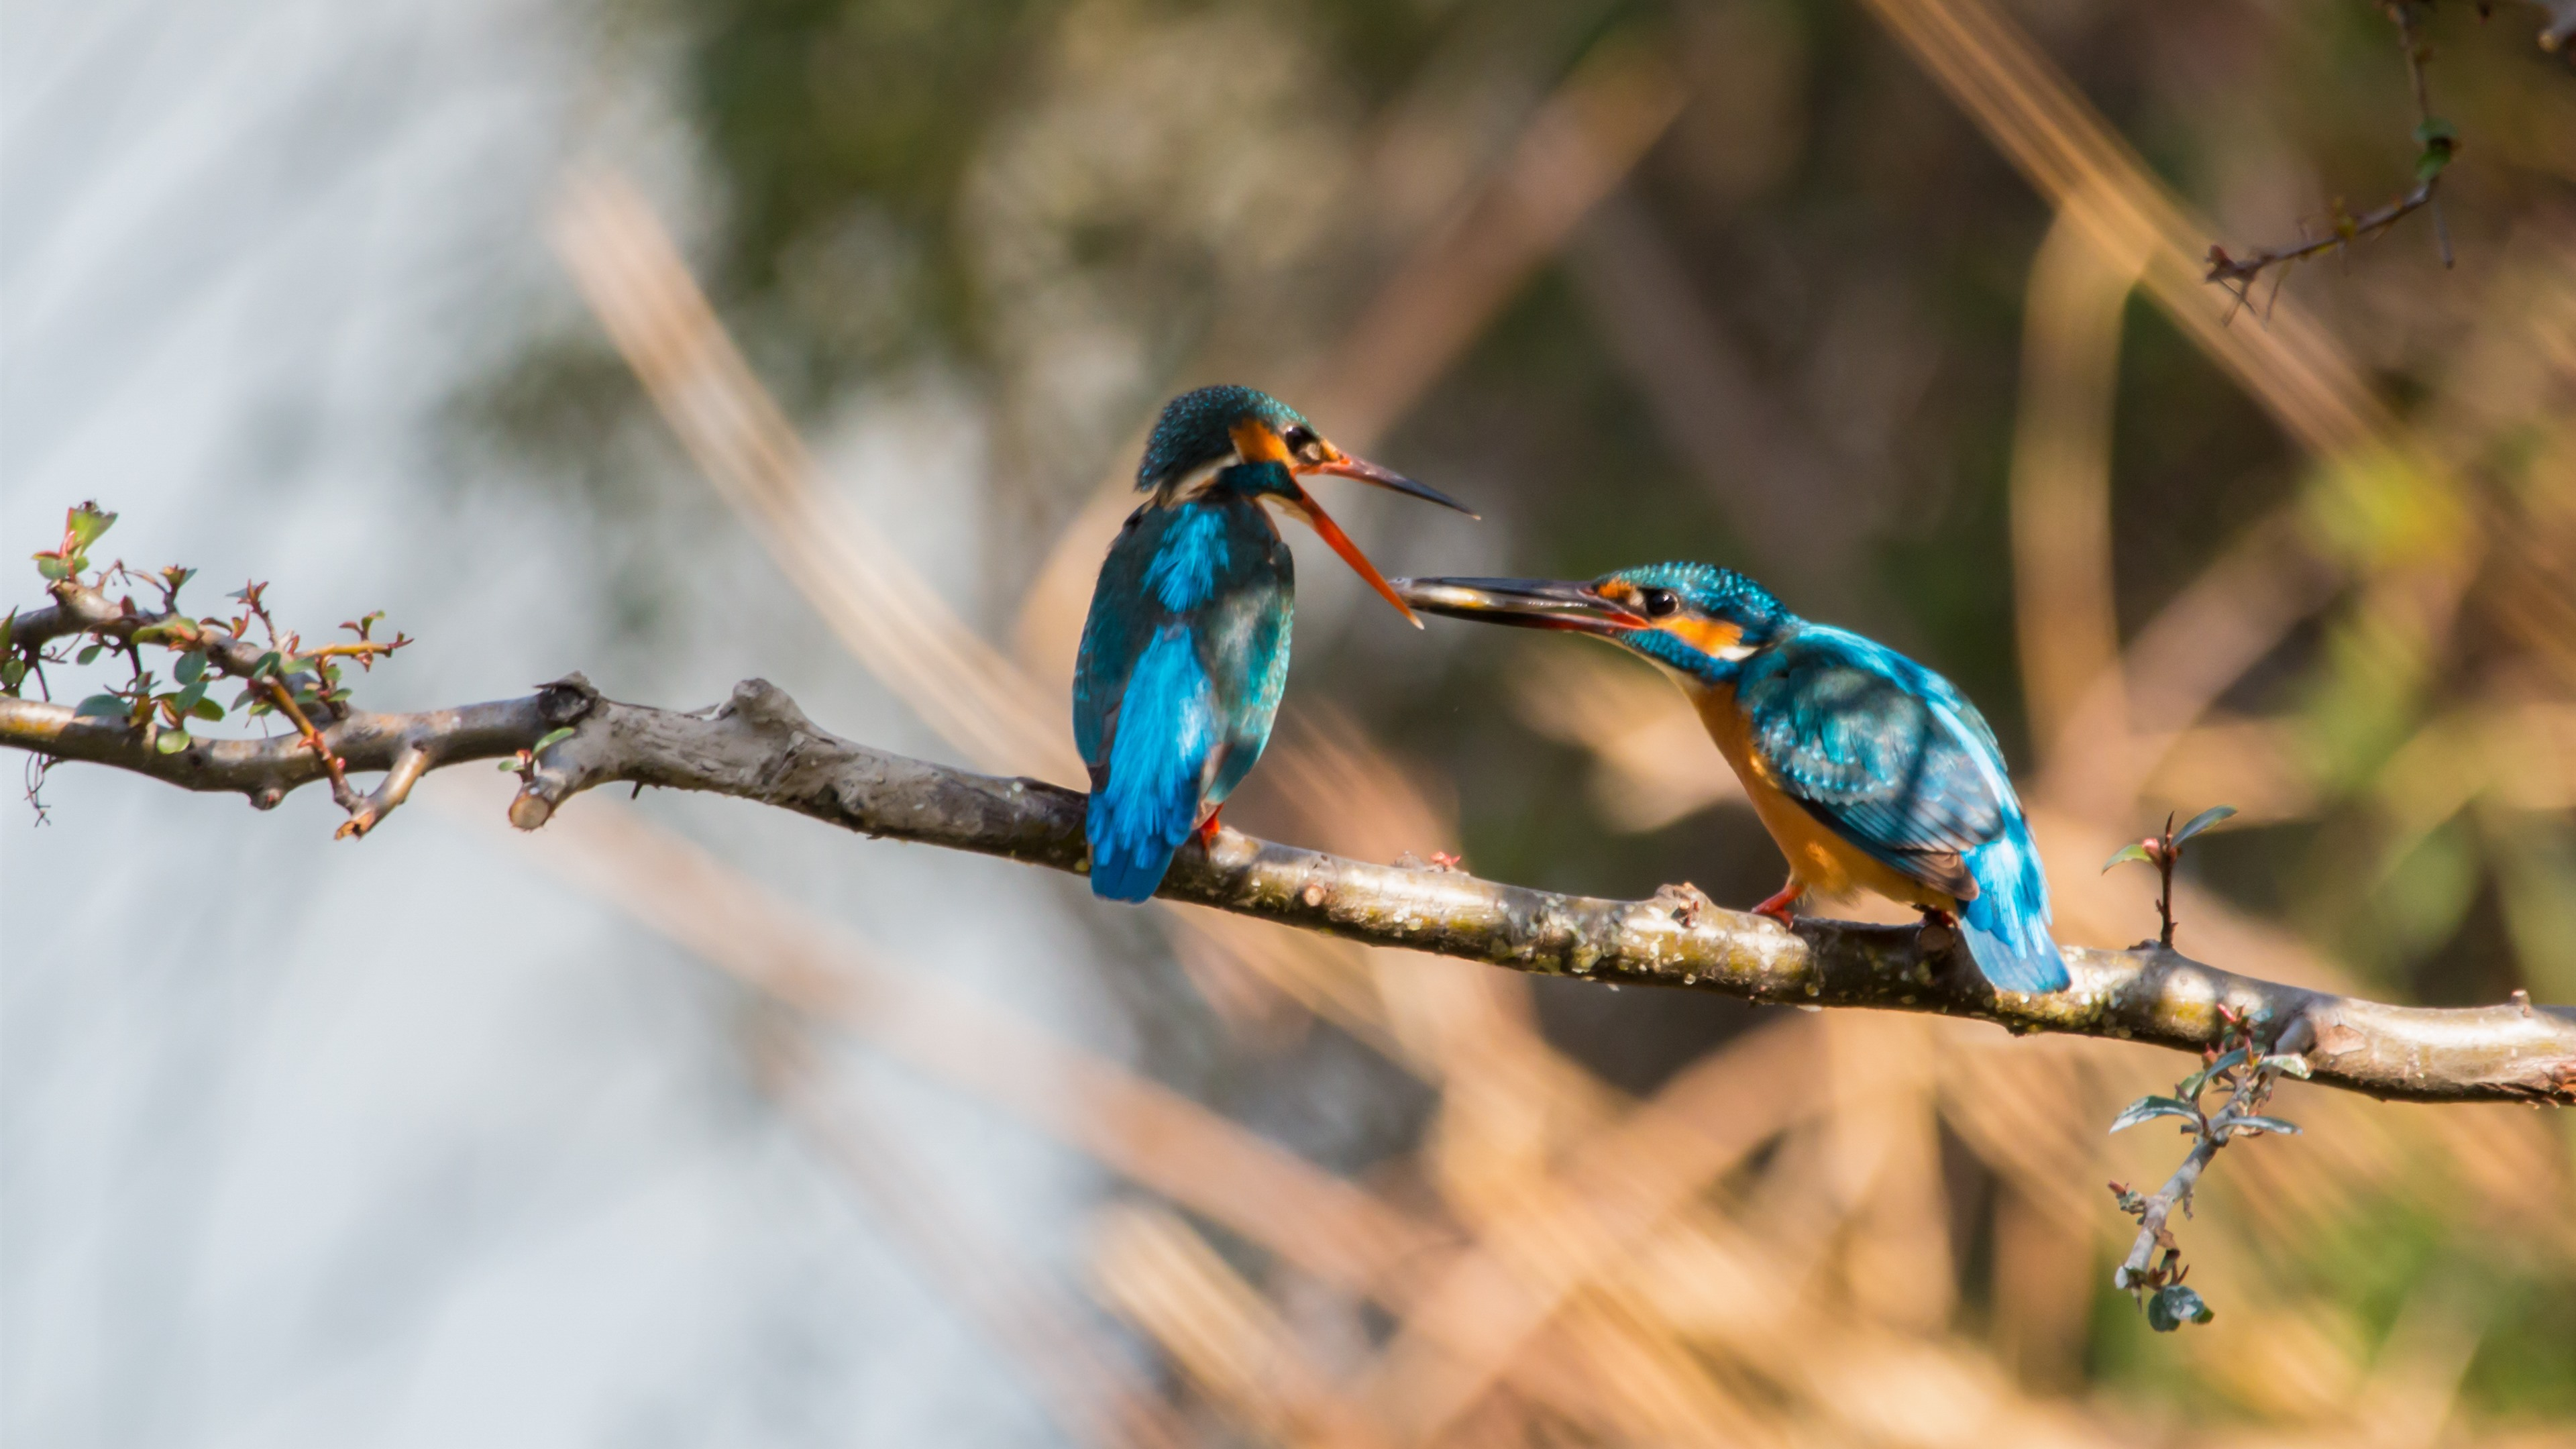 Two kingfishers sitting on a twig.